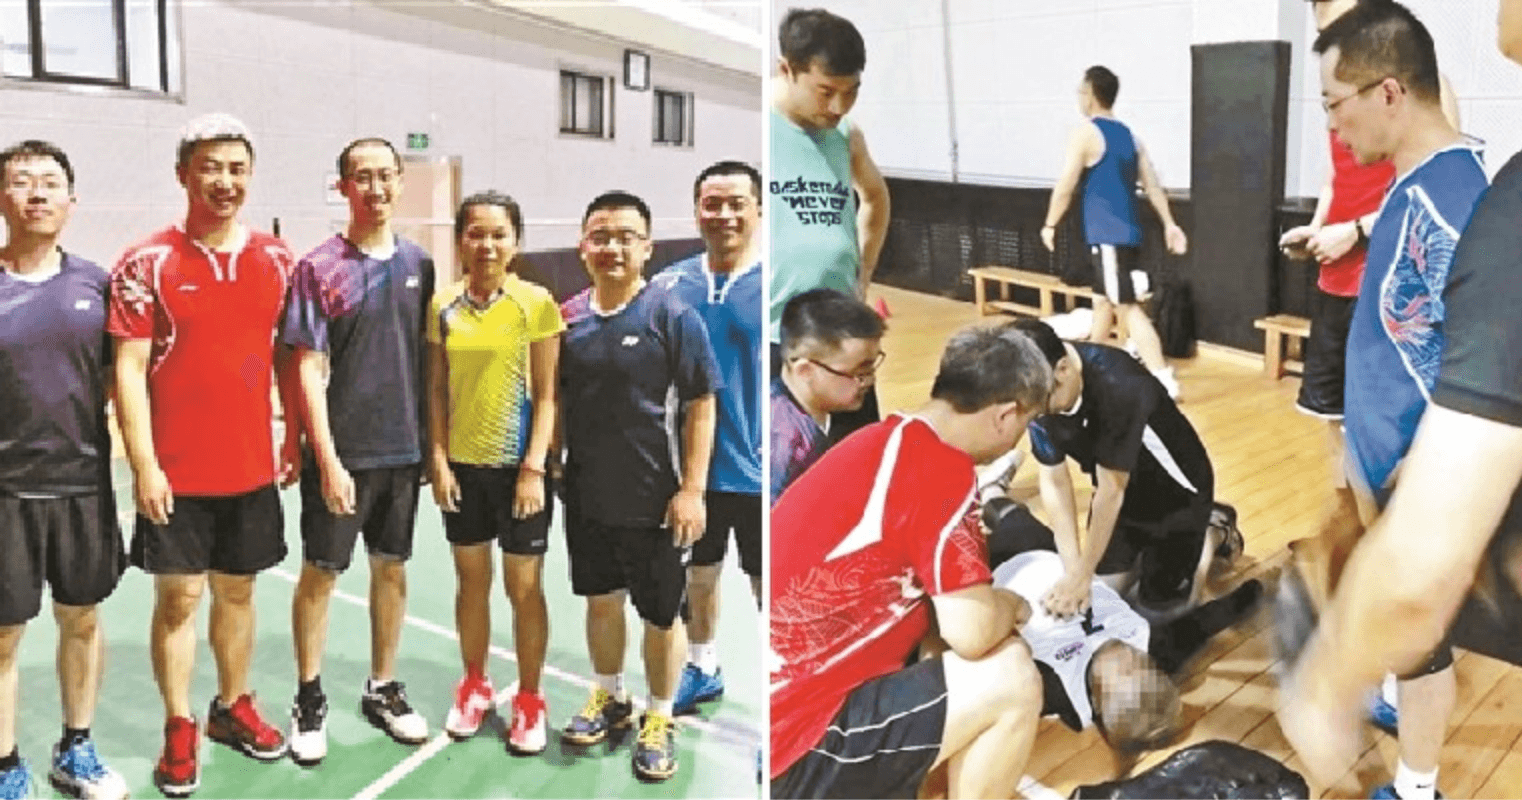 Johor Man Collapses And Dies While He Plays Badminton - World Of Buzz 2